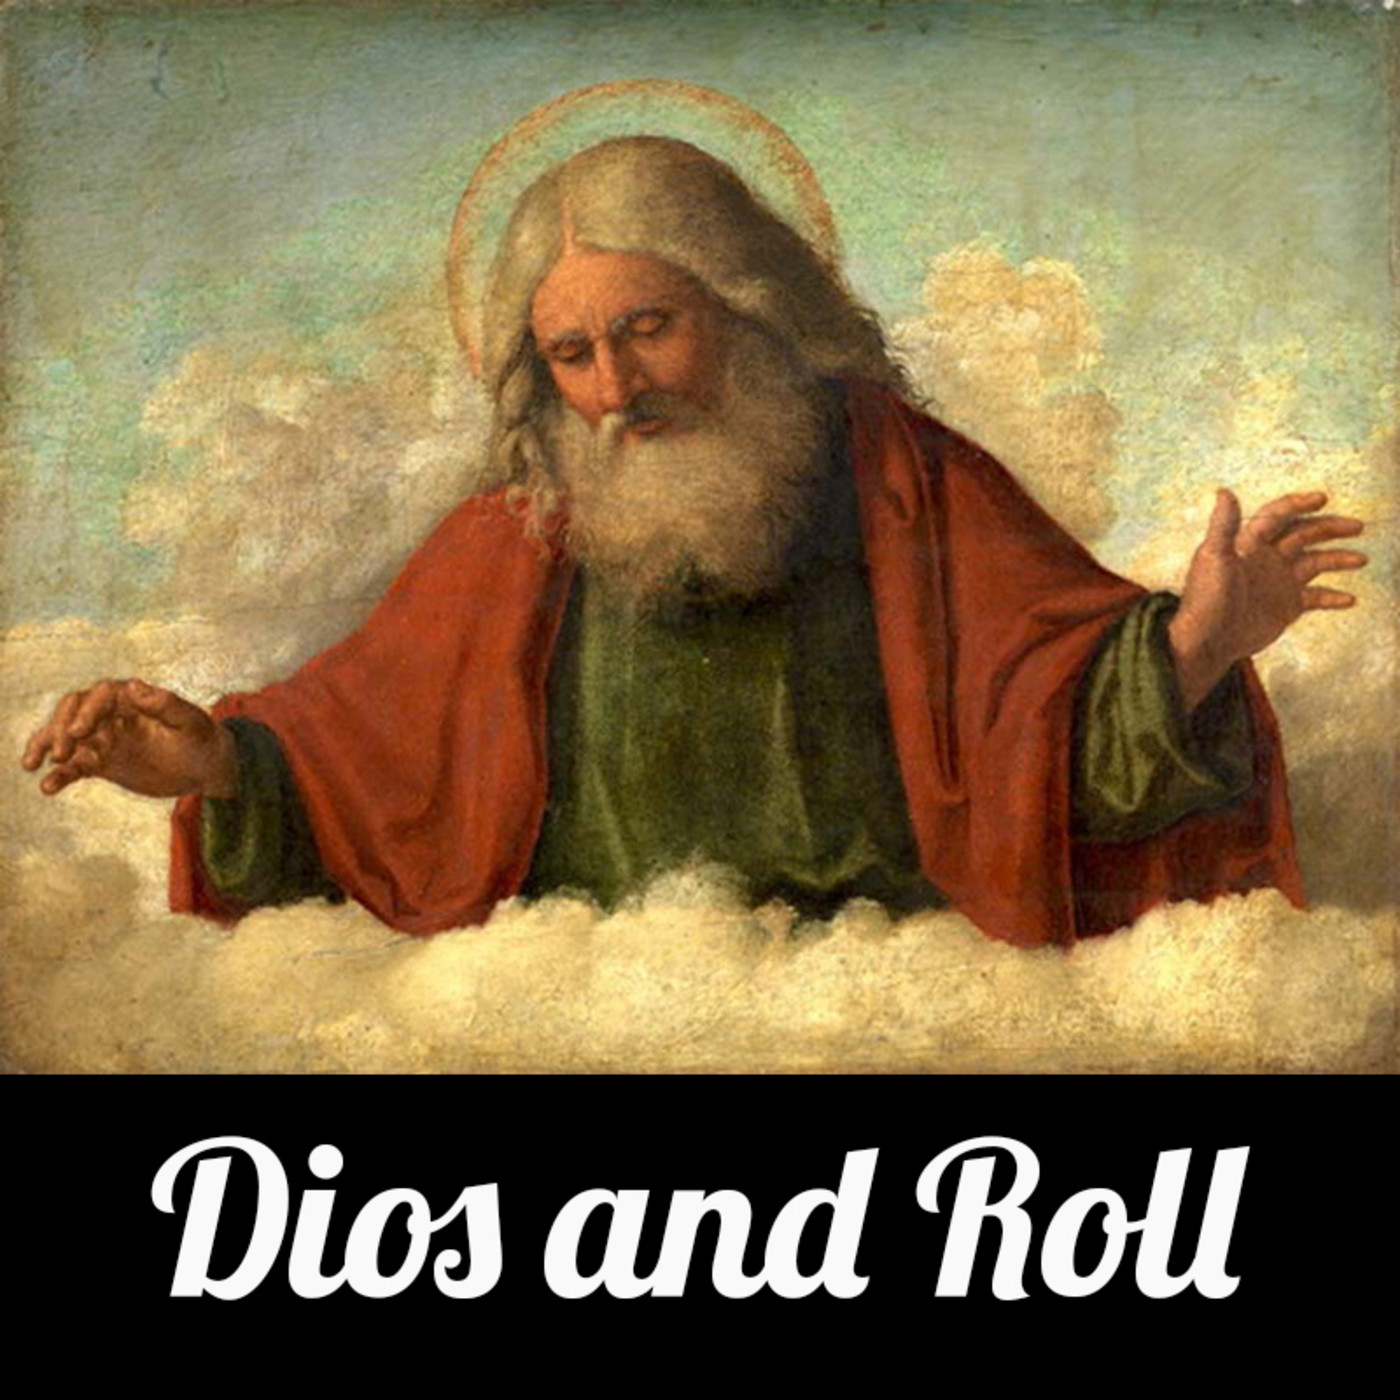 Dios and Roll / God and Roll